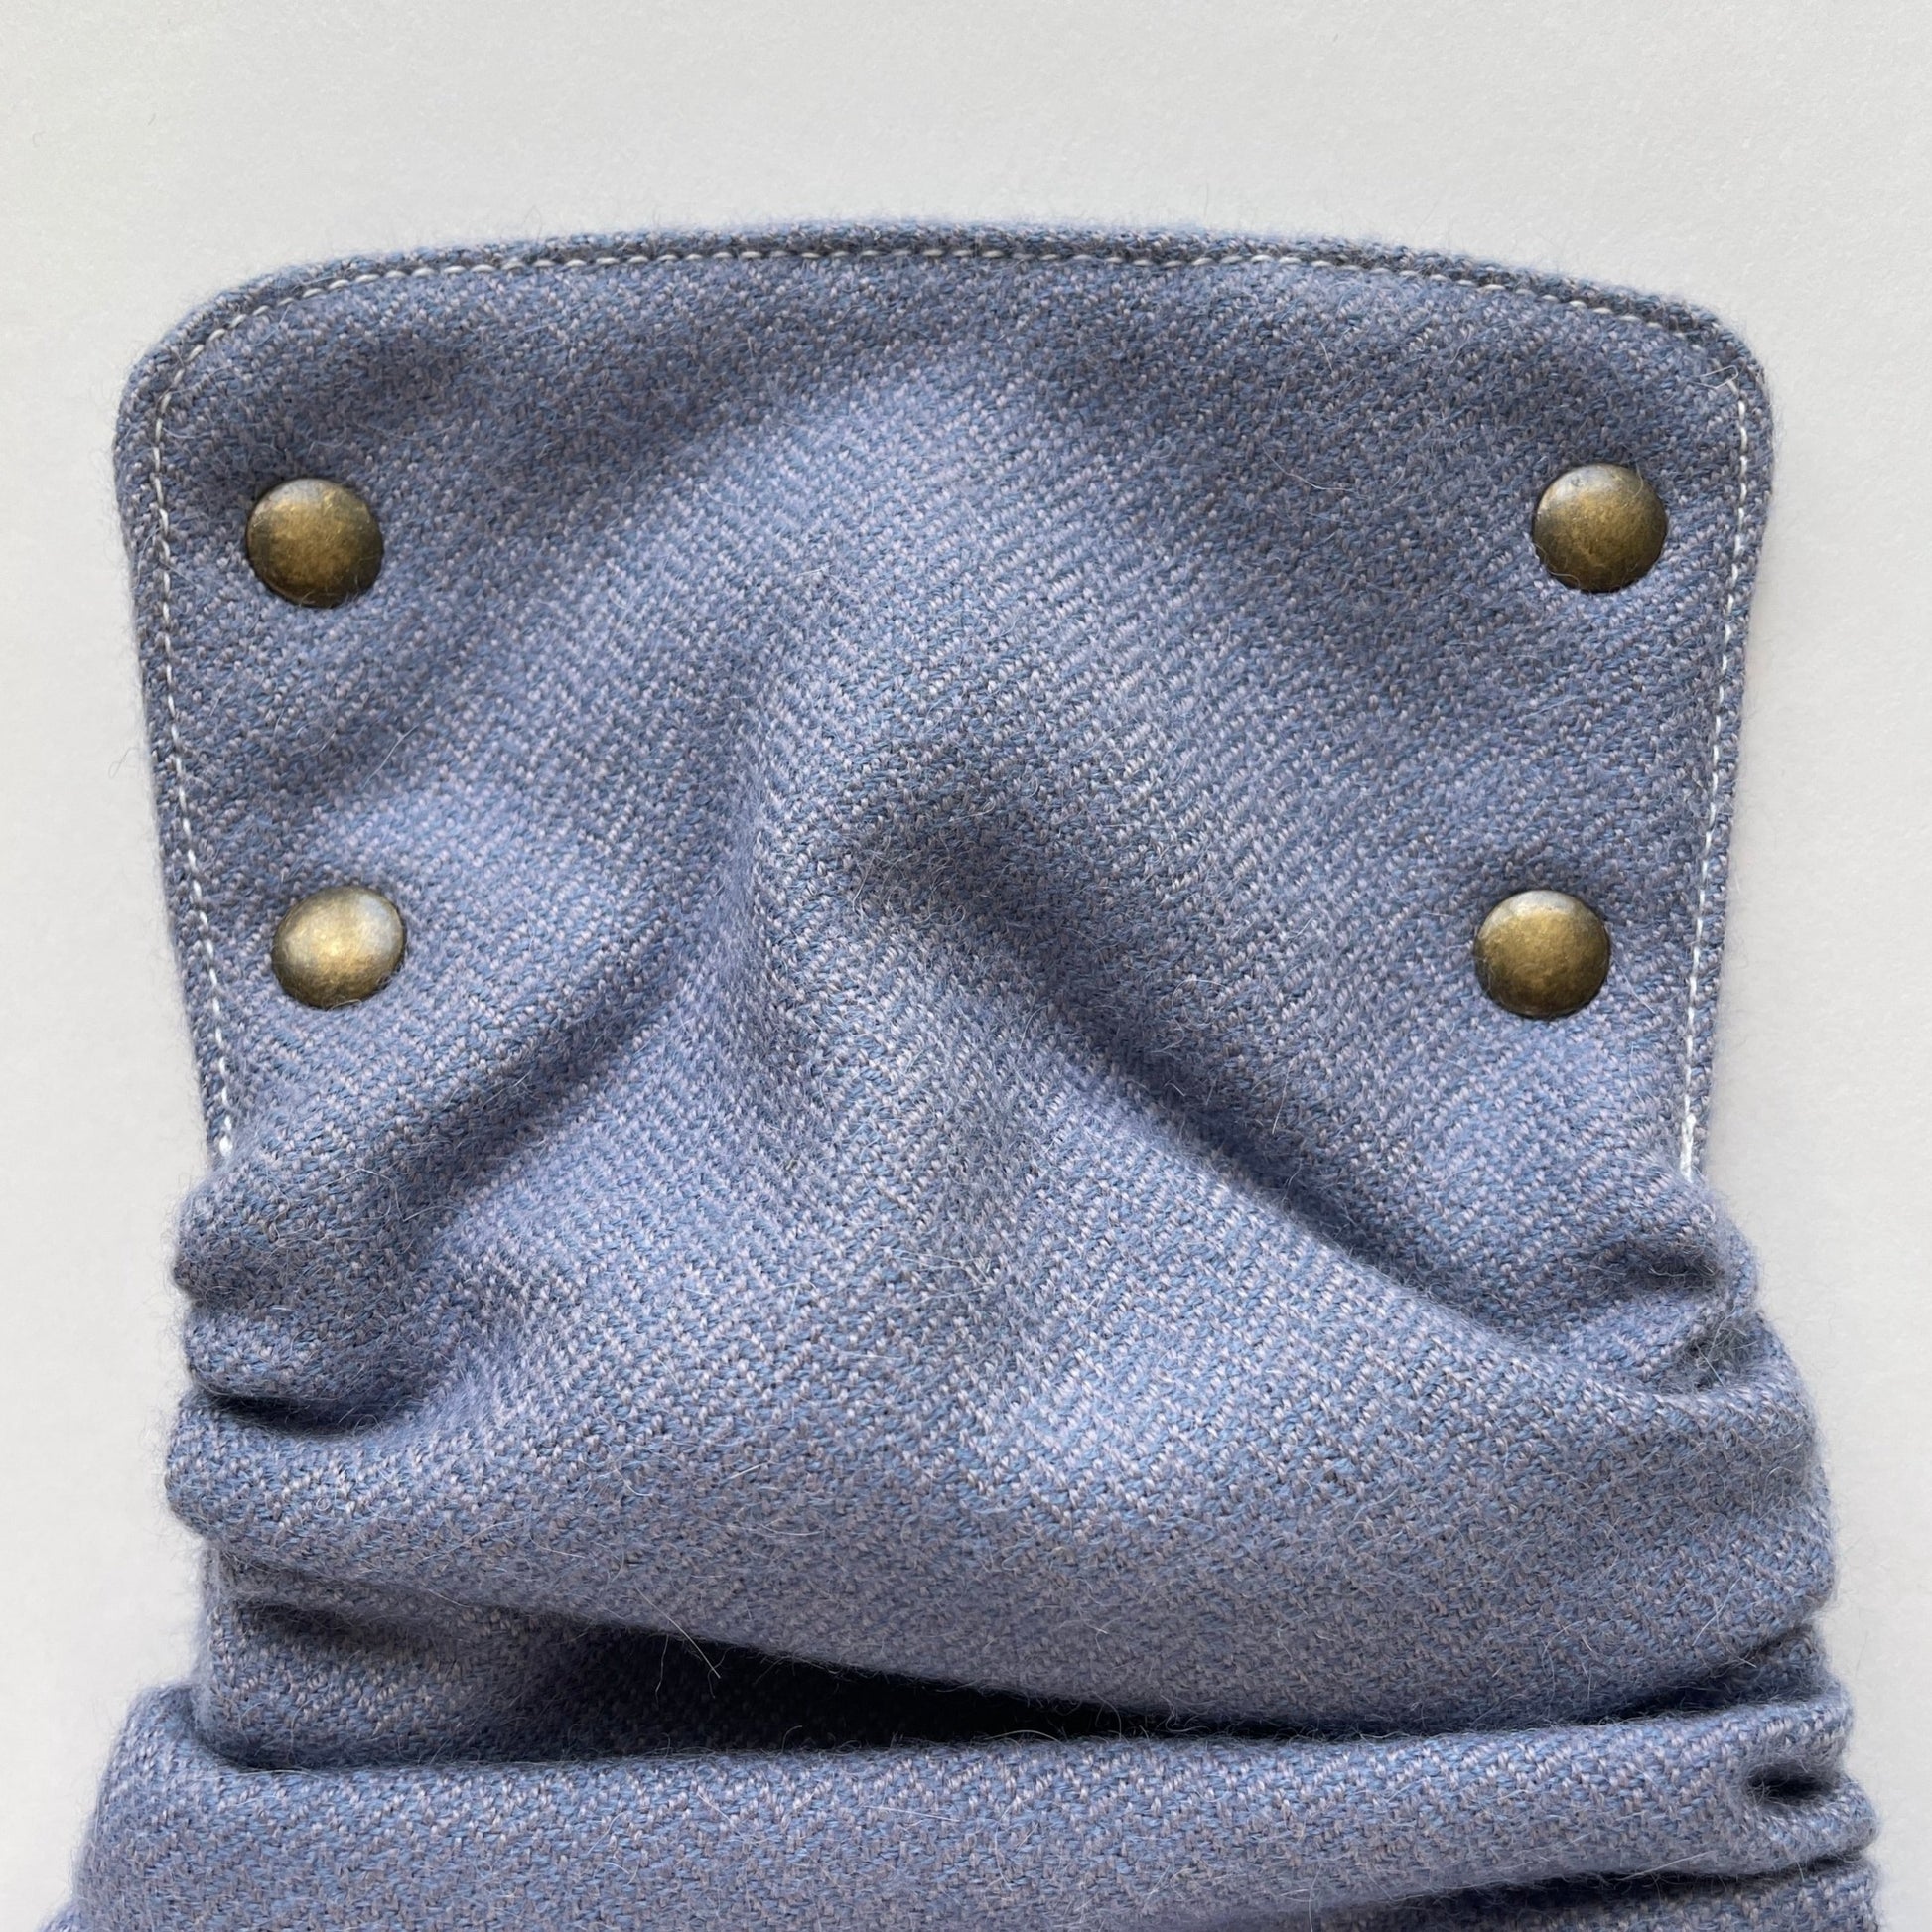 The front panel of a dawn-colored alpaca diaper cover with a blue-purple mini-herringbone pattern with 4 brass snaps in an antique finish laying on top of a white background.